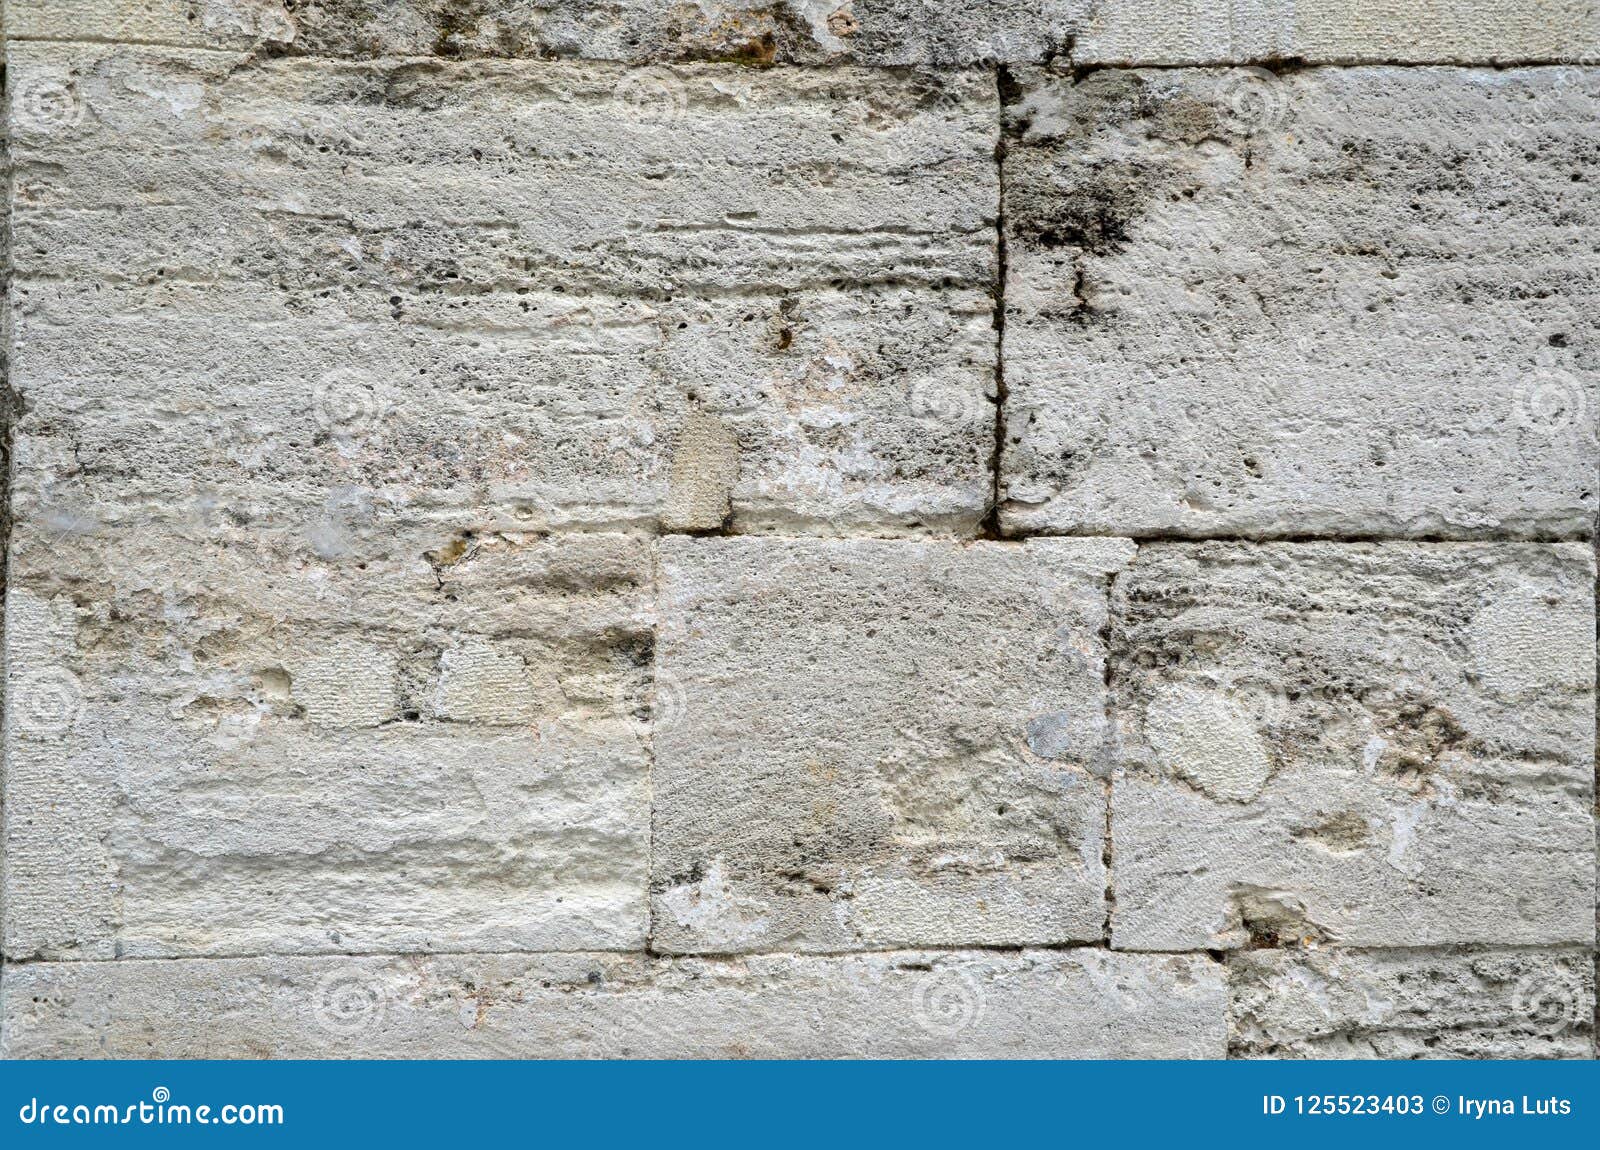 wall background. citywall. old stone texture/background.